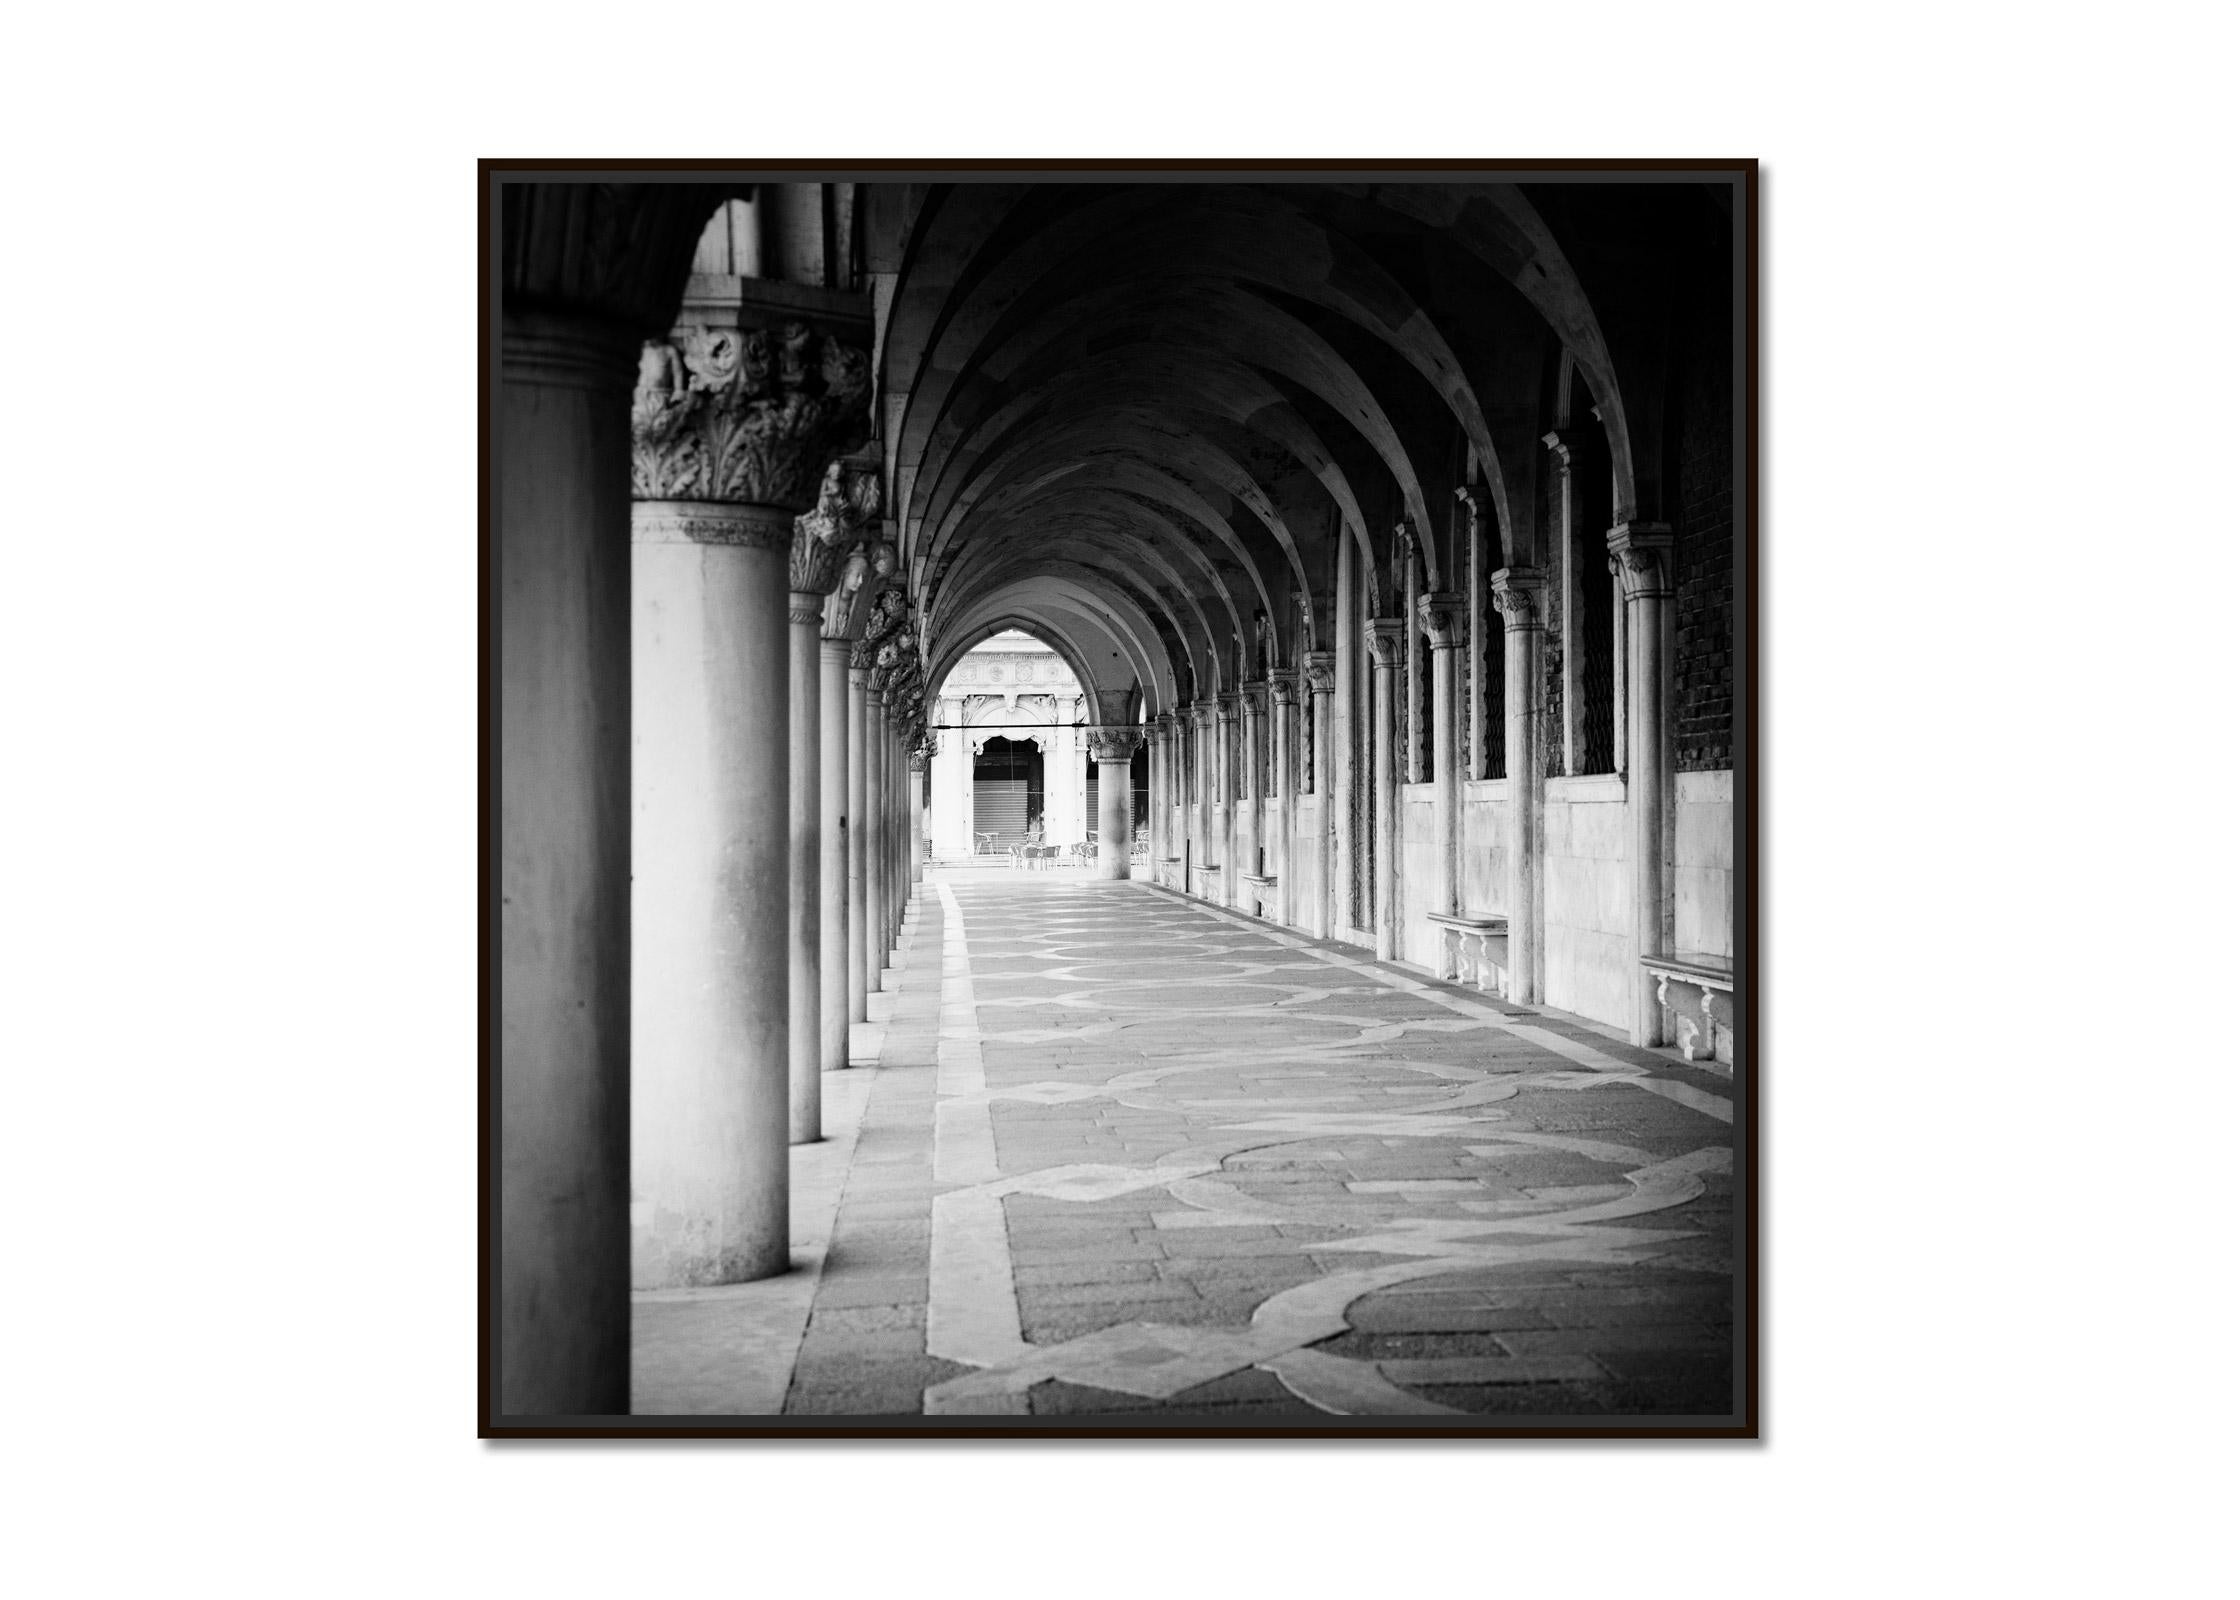 Doges Palace Arcade, Venice, Italy, black and white photography, art cityscape - Photograph by Gerald Berghammer